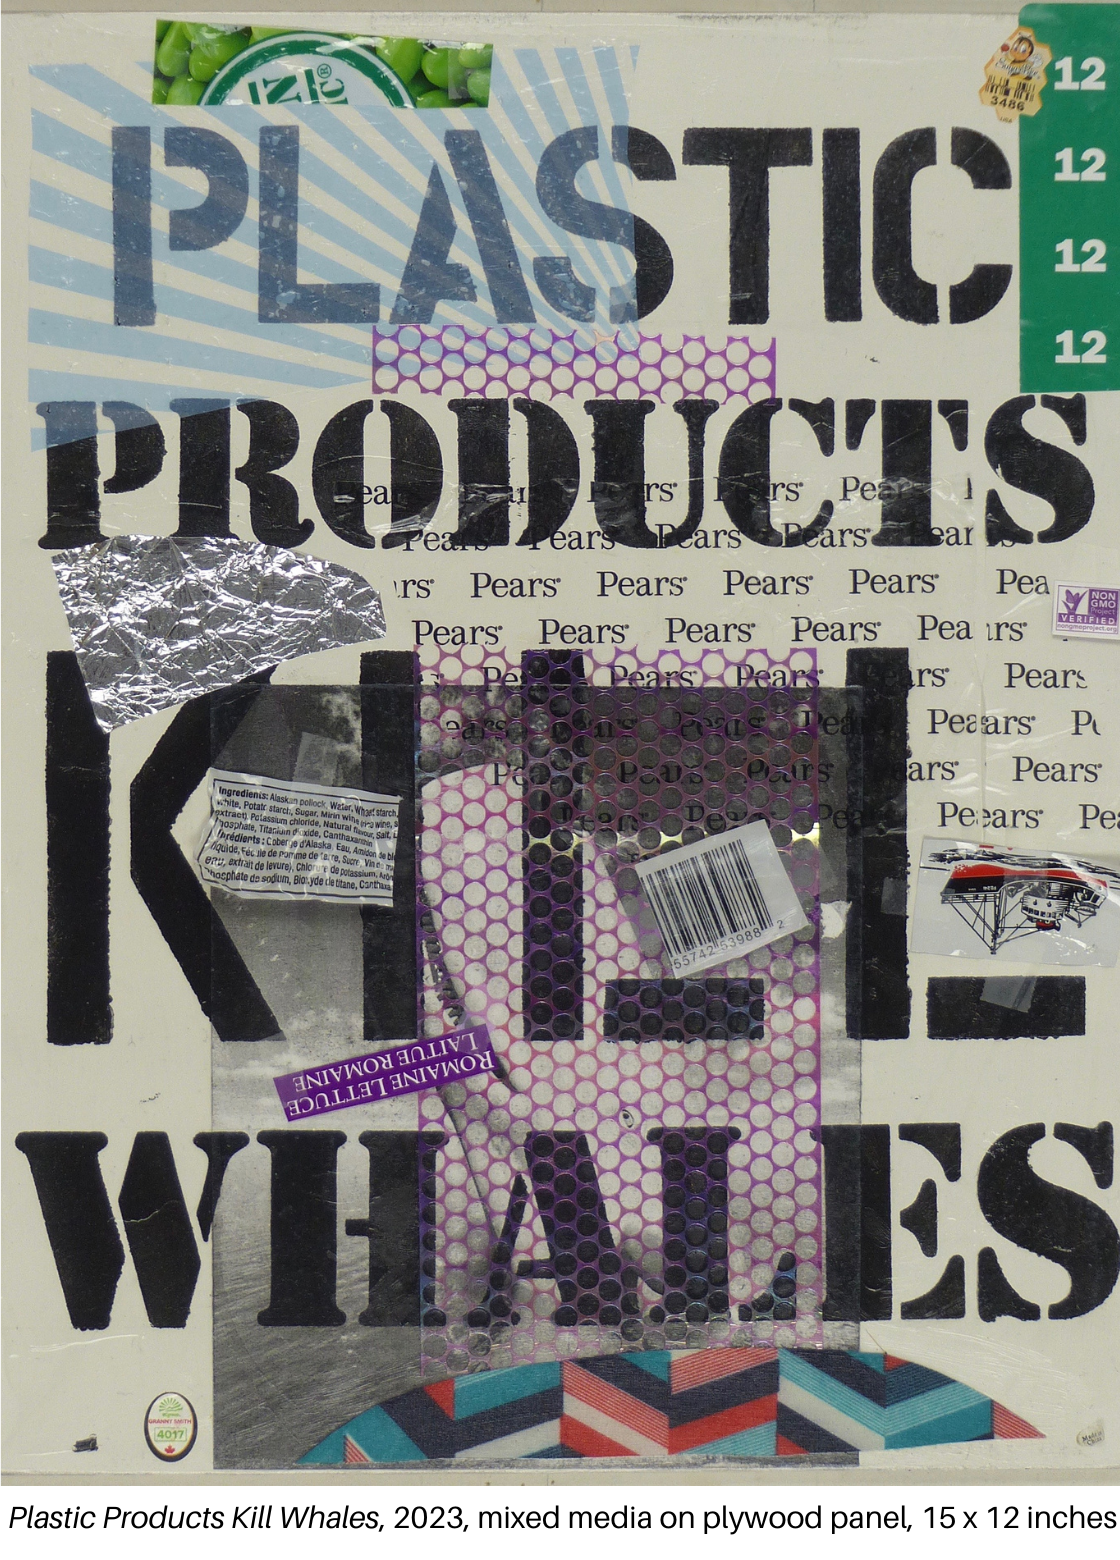 Plastic Products Kill Whales